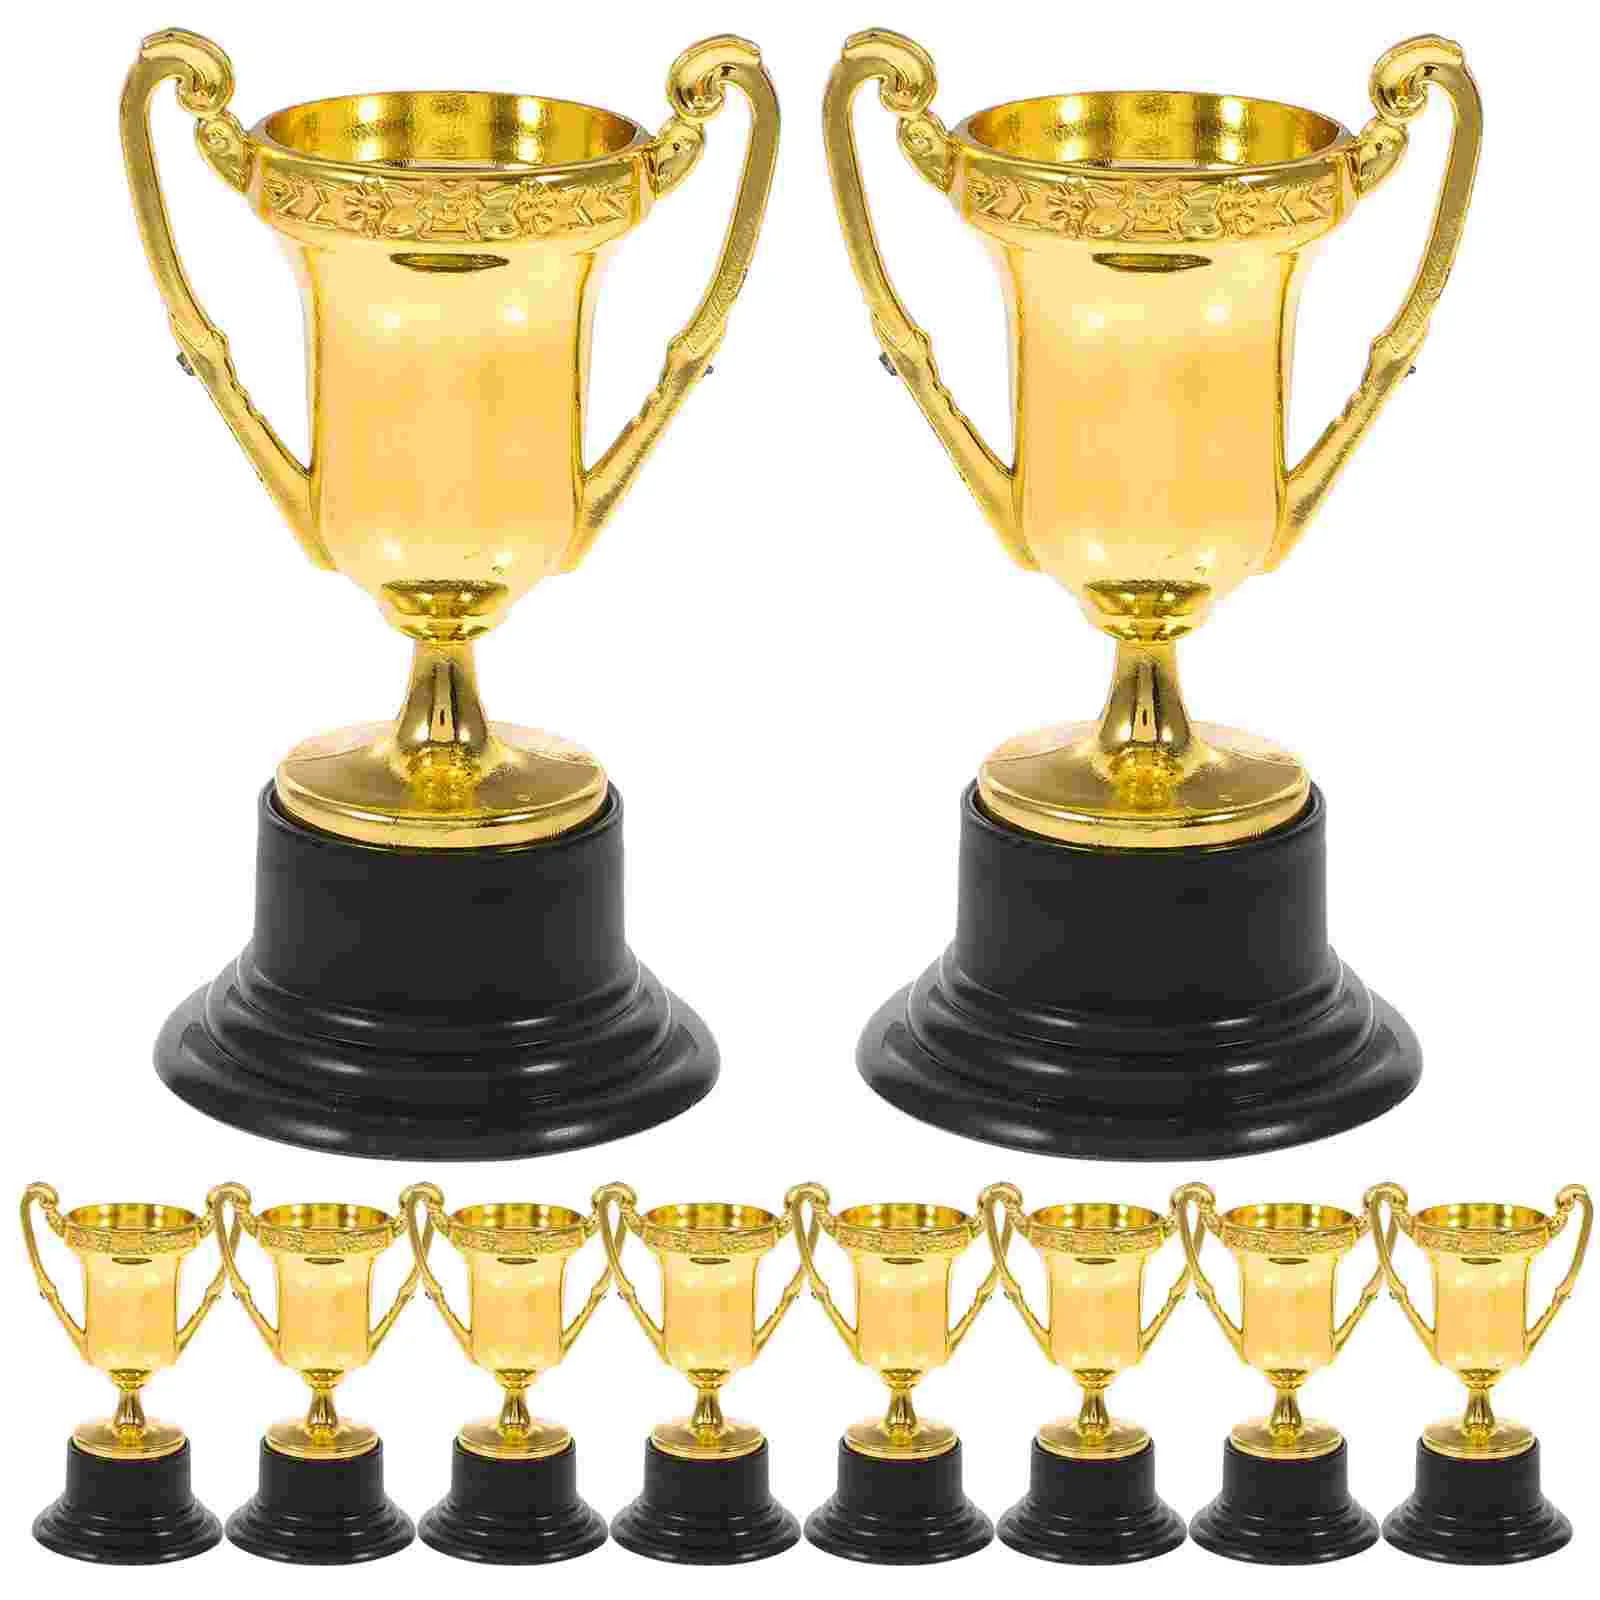 

Trophies Trophy Kids Award Plastic Mini Cup Awards Gold Winner Children Cups Learning Party Early Toy Soccer Favors Golden